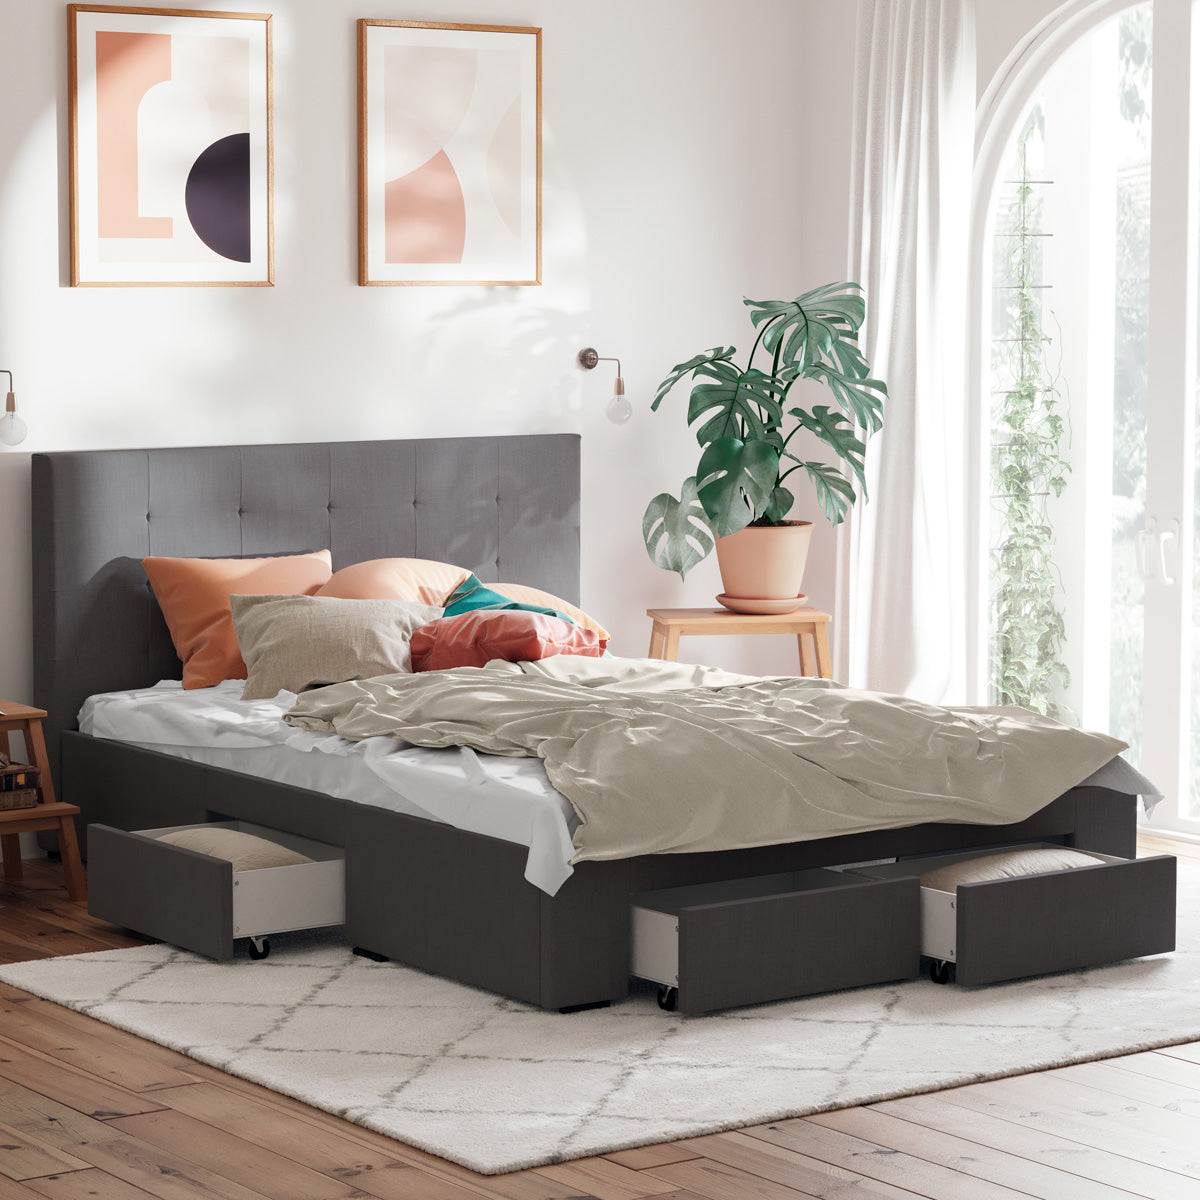 Charcoal Audrey Storage Bed Frame with Heston Bedside Tables Package